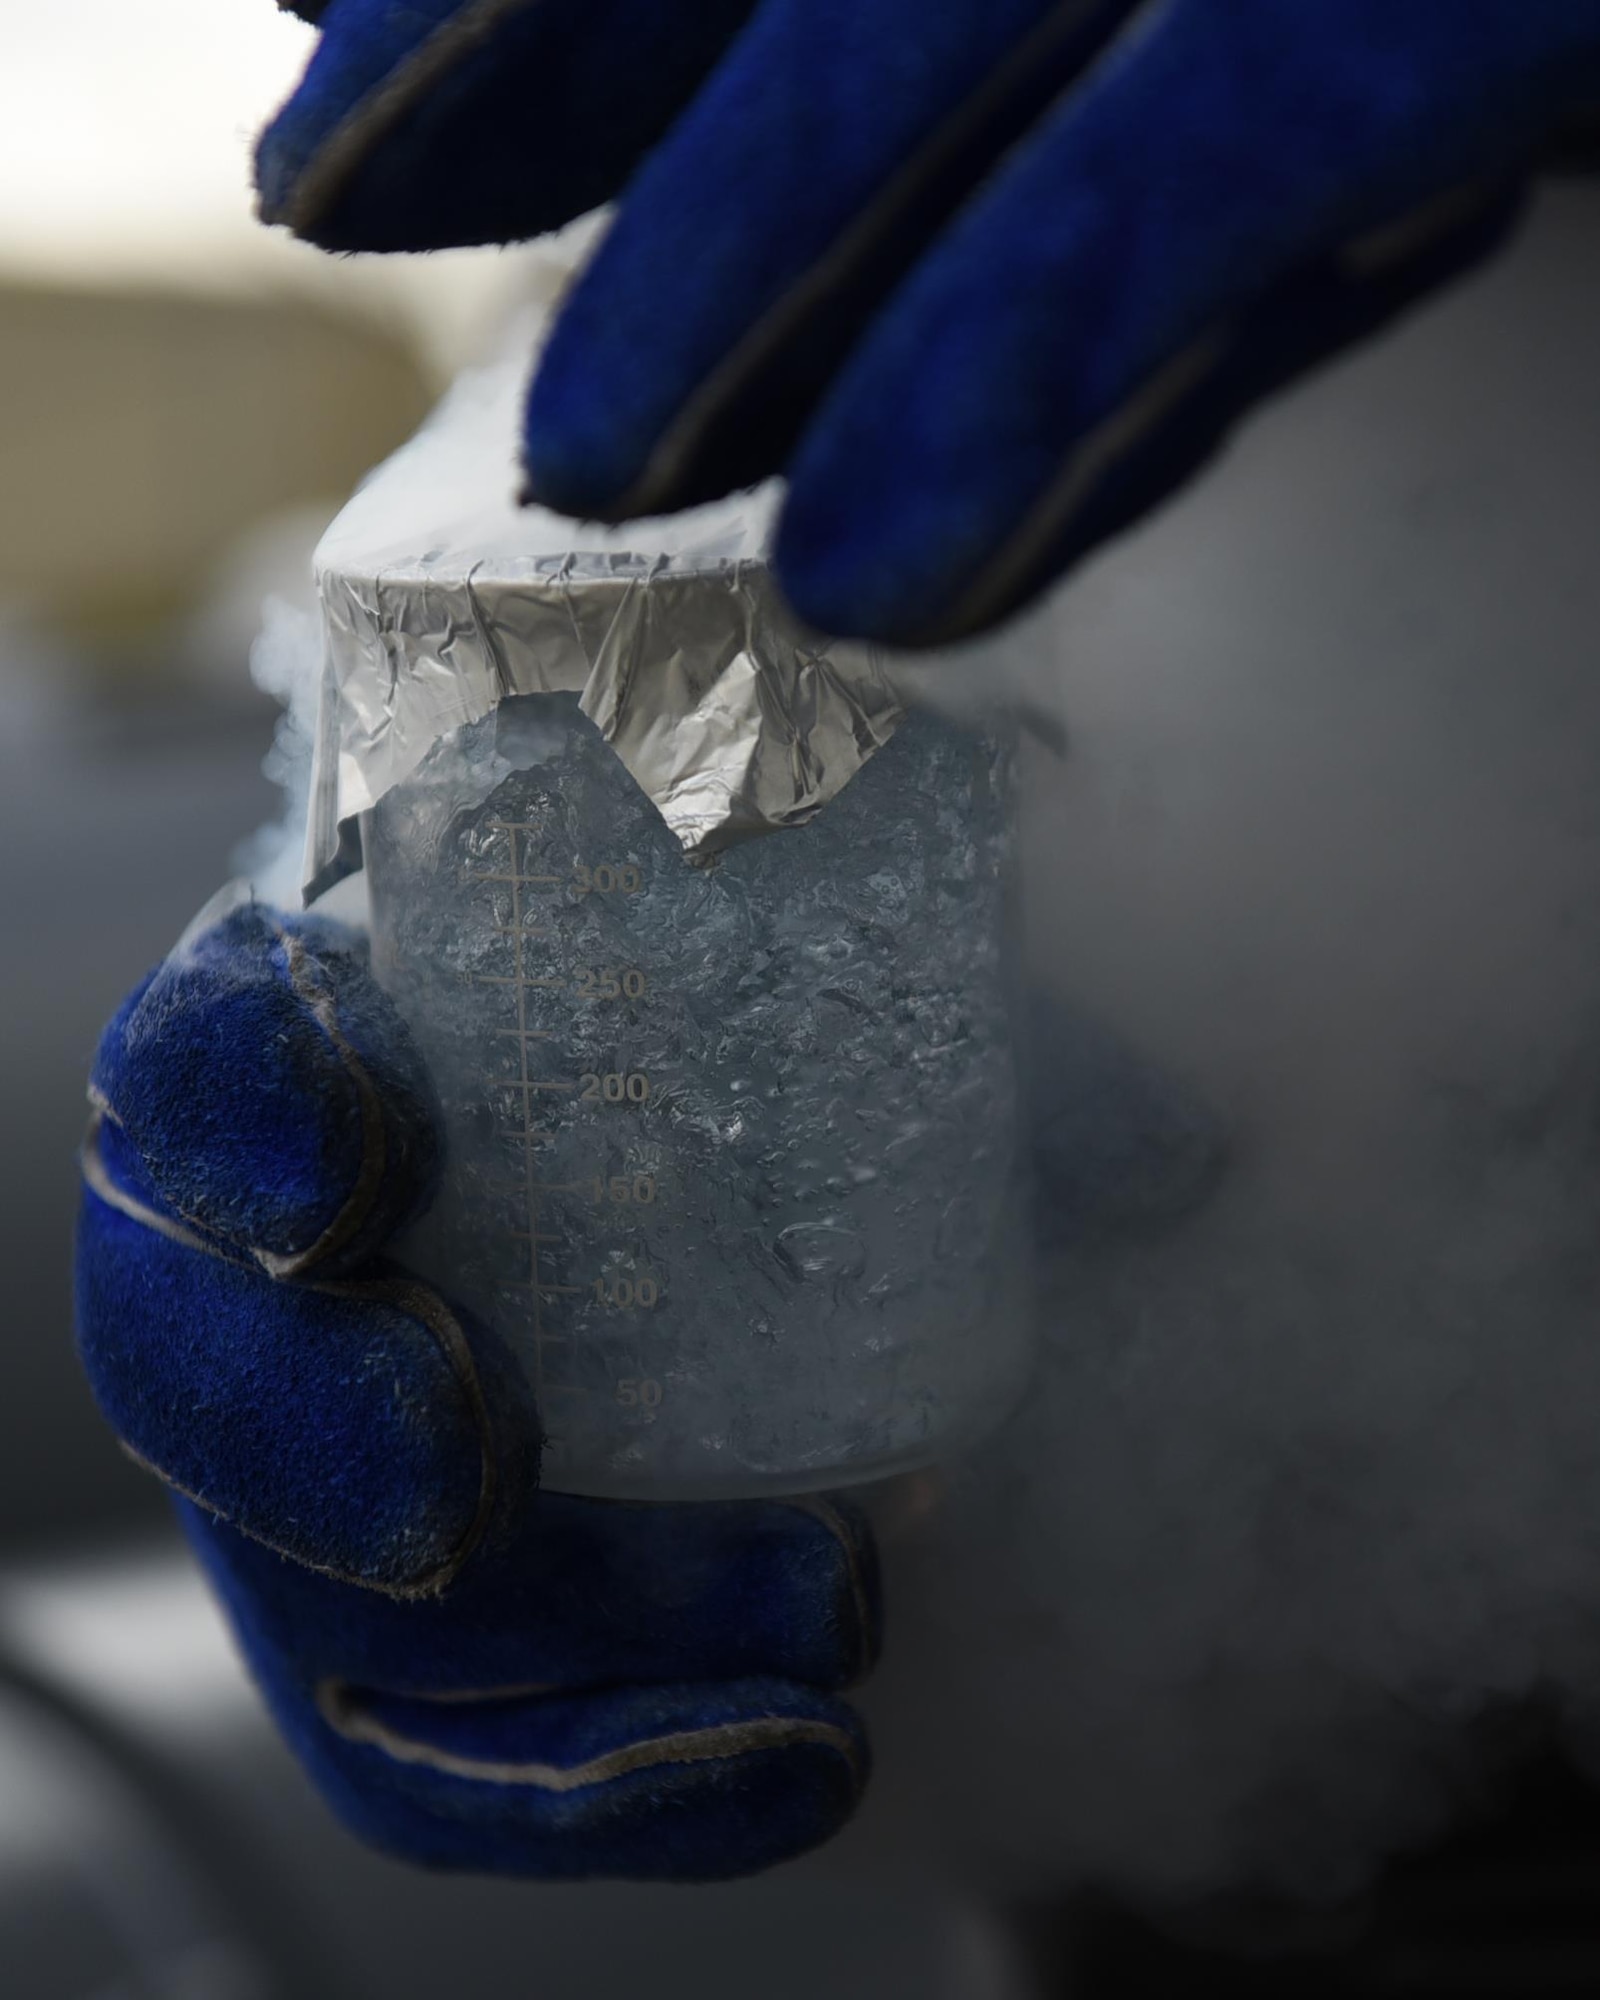 Liquid oxygen, or LOX, is pressurized oxygen that has been cooled to minus 297 degrees Fahrenheit, turning it into a boiling liquid with a pale blue color. In liquid form, it’s transported more efficiently from holding containers to aircraft. (U.S. Air Force photo by Airman 1st Class Kevin Sommer Giron)